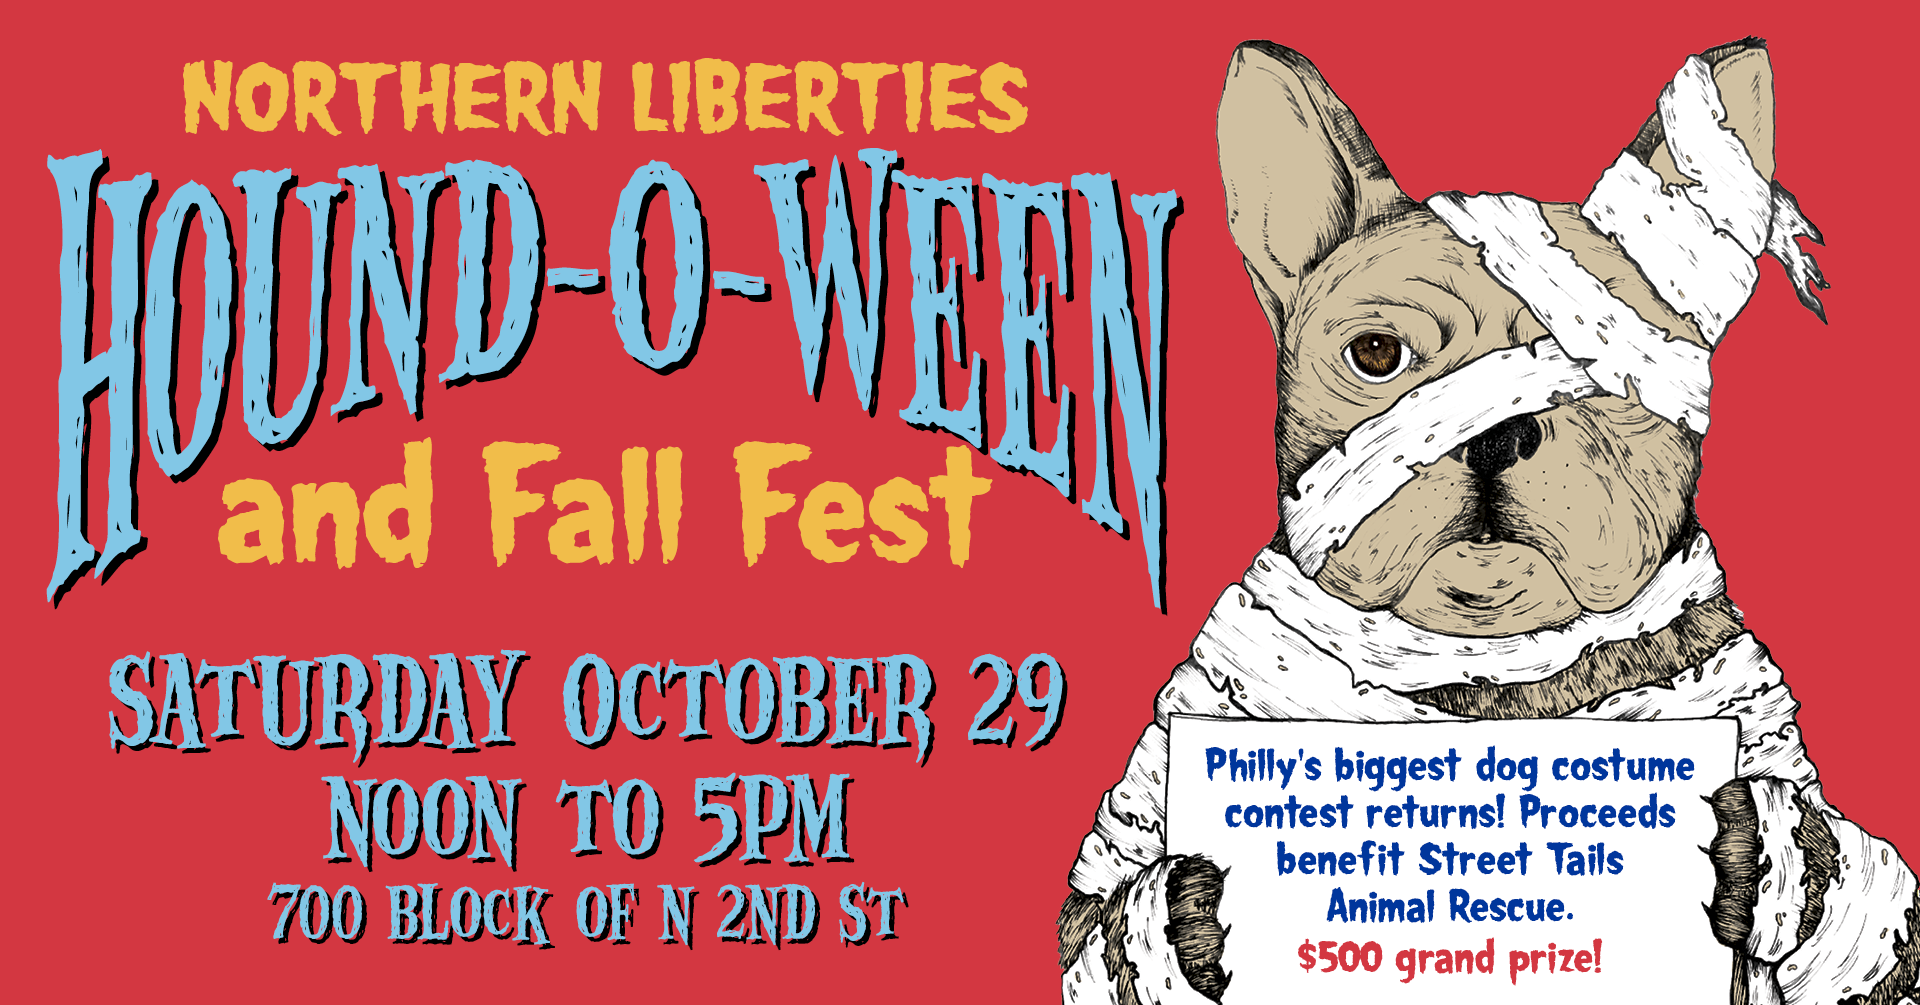 NLBID Hound-O-Ween FB Event 1.0.png